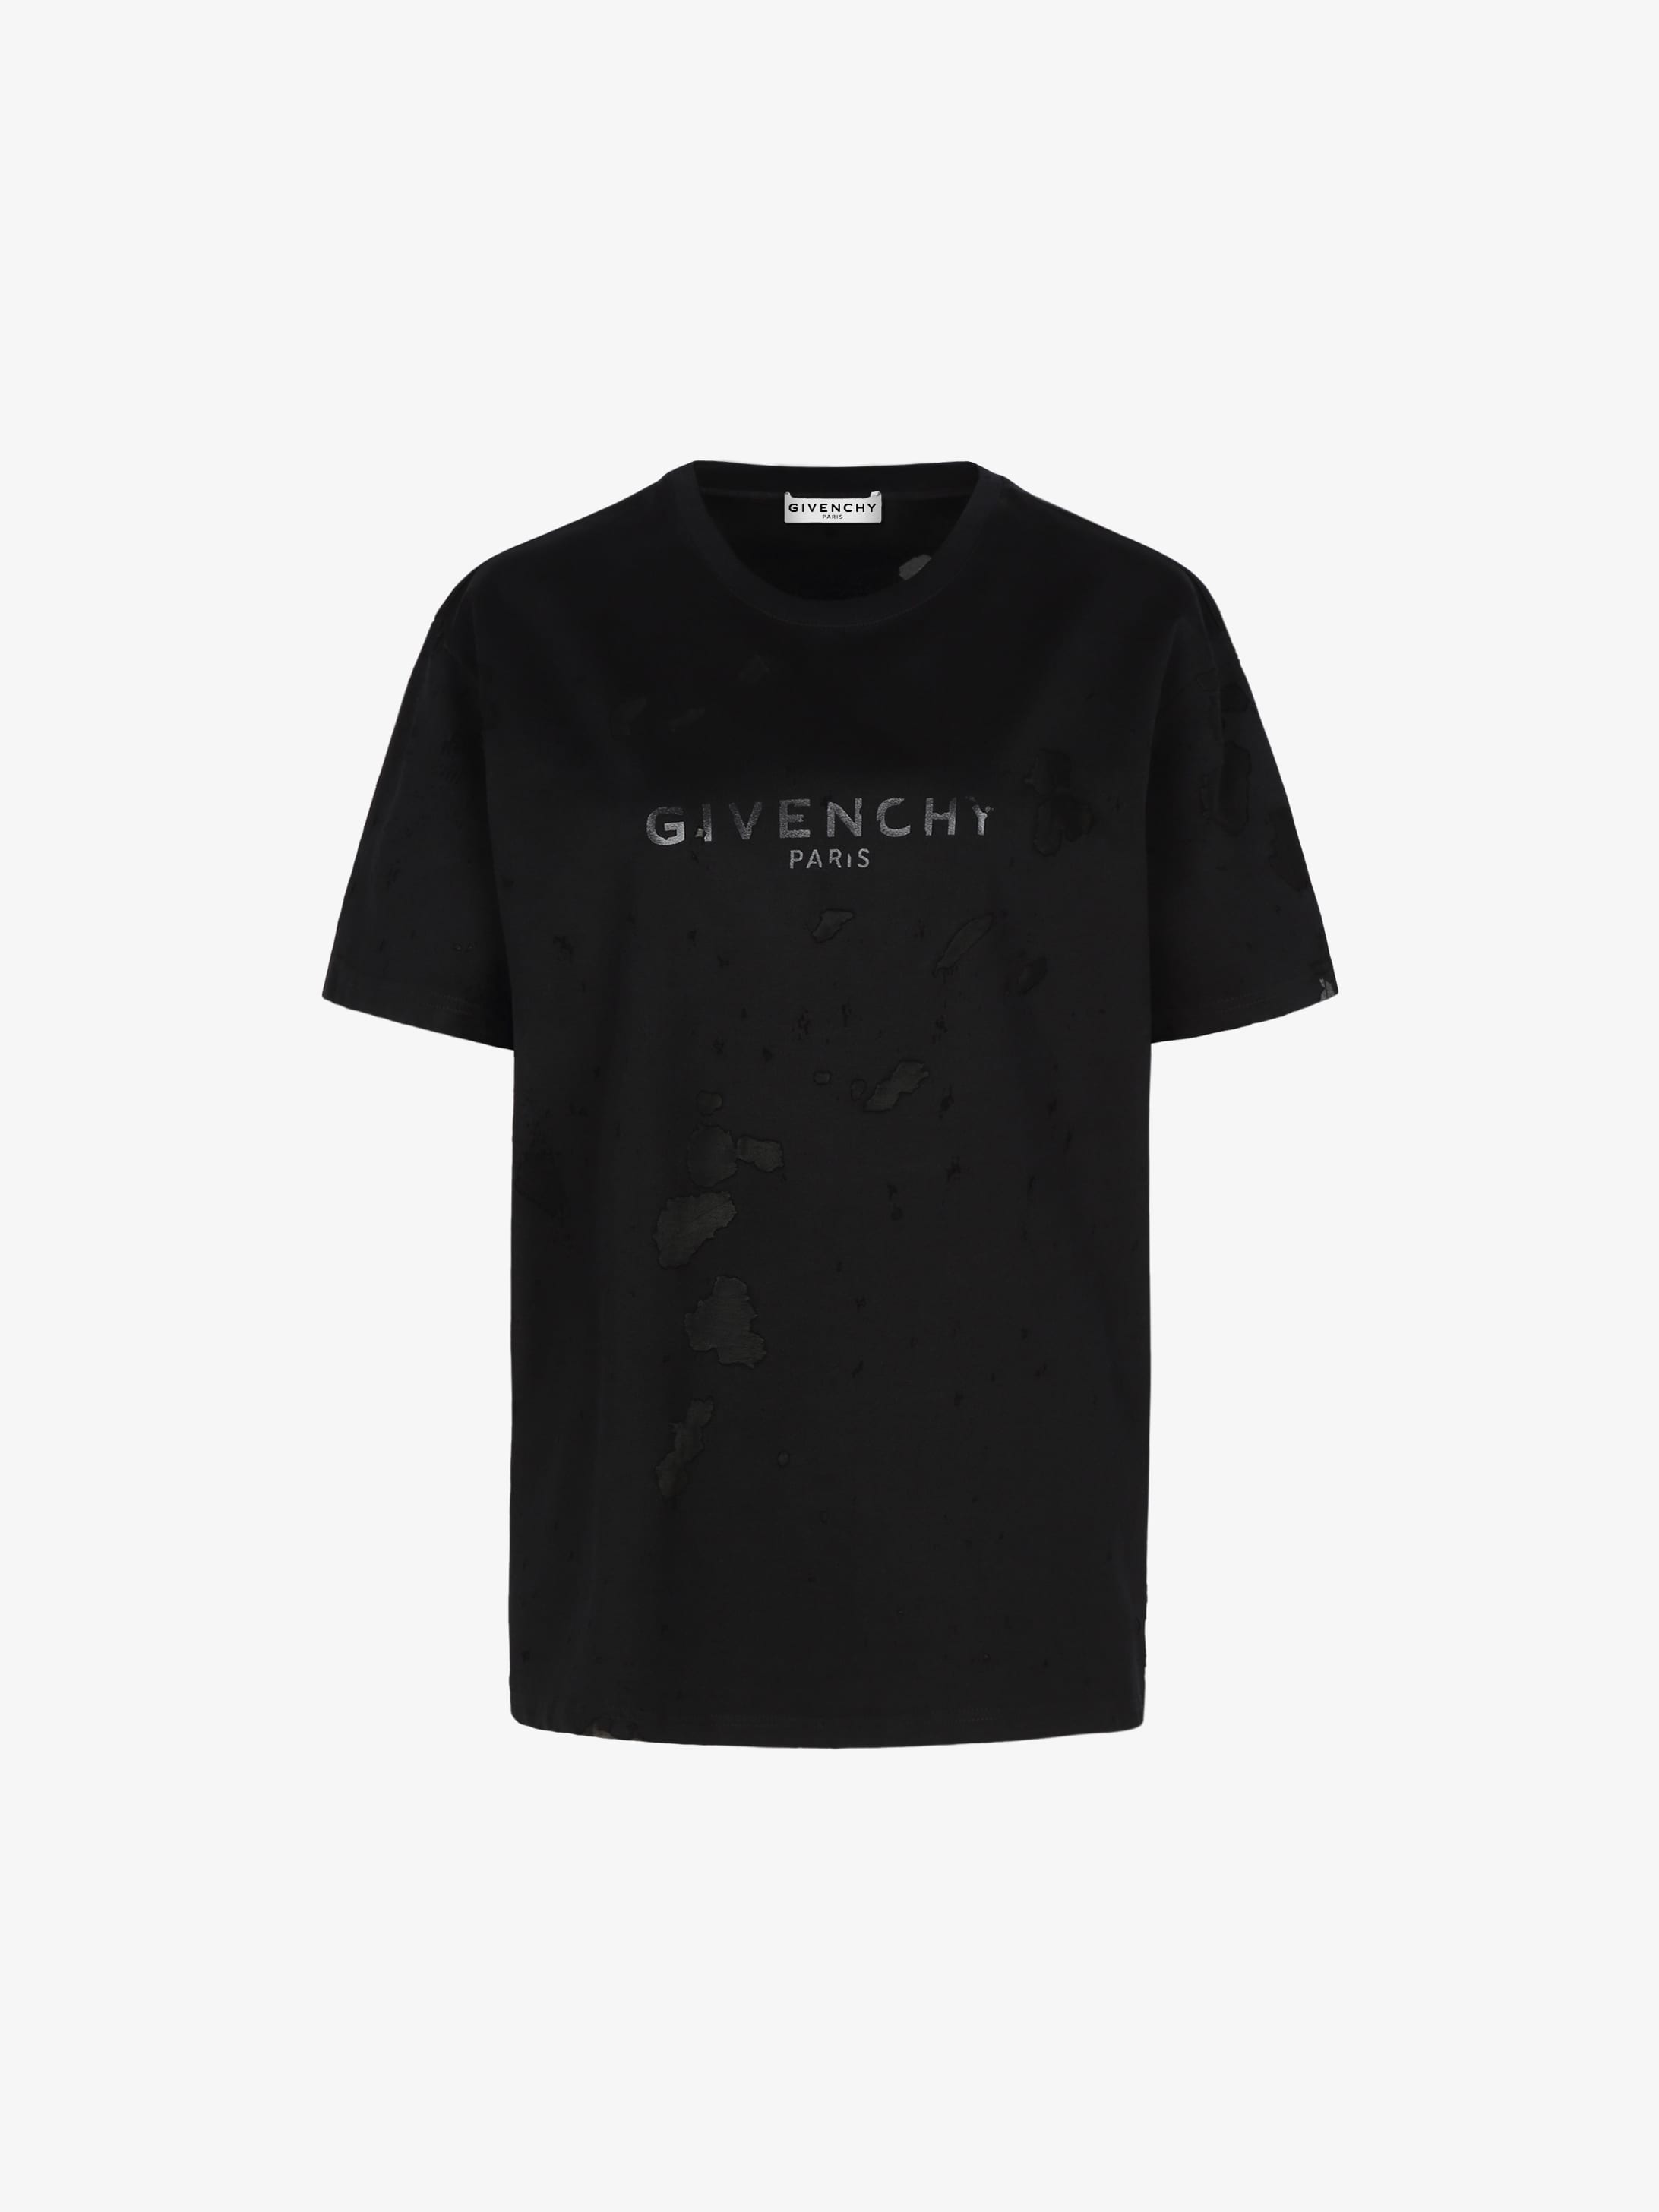 GIVENCHY PARIS oversized destroyed t 